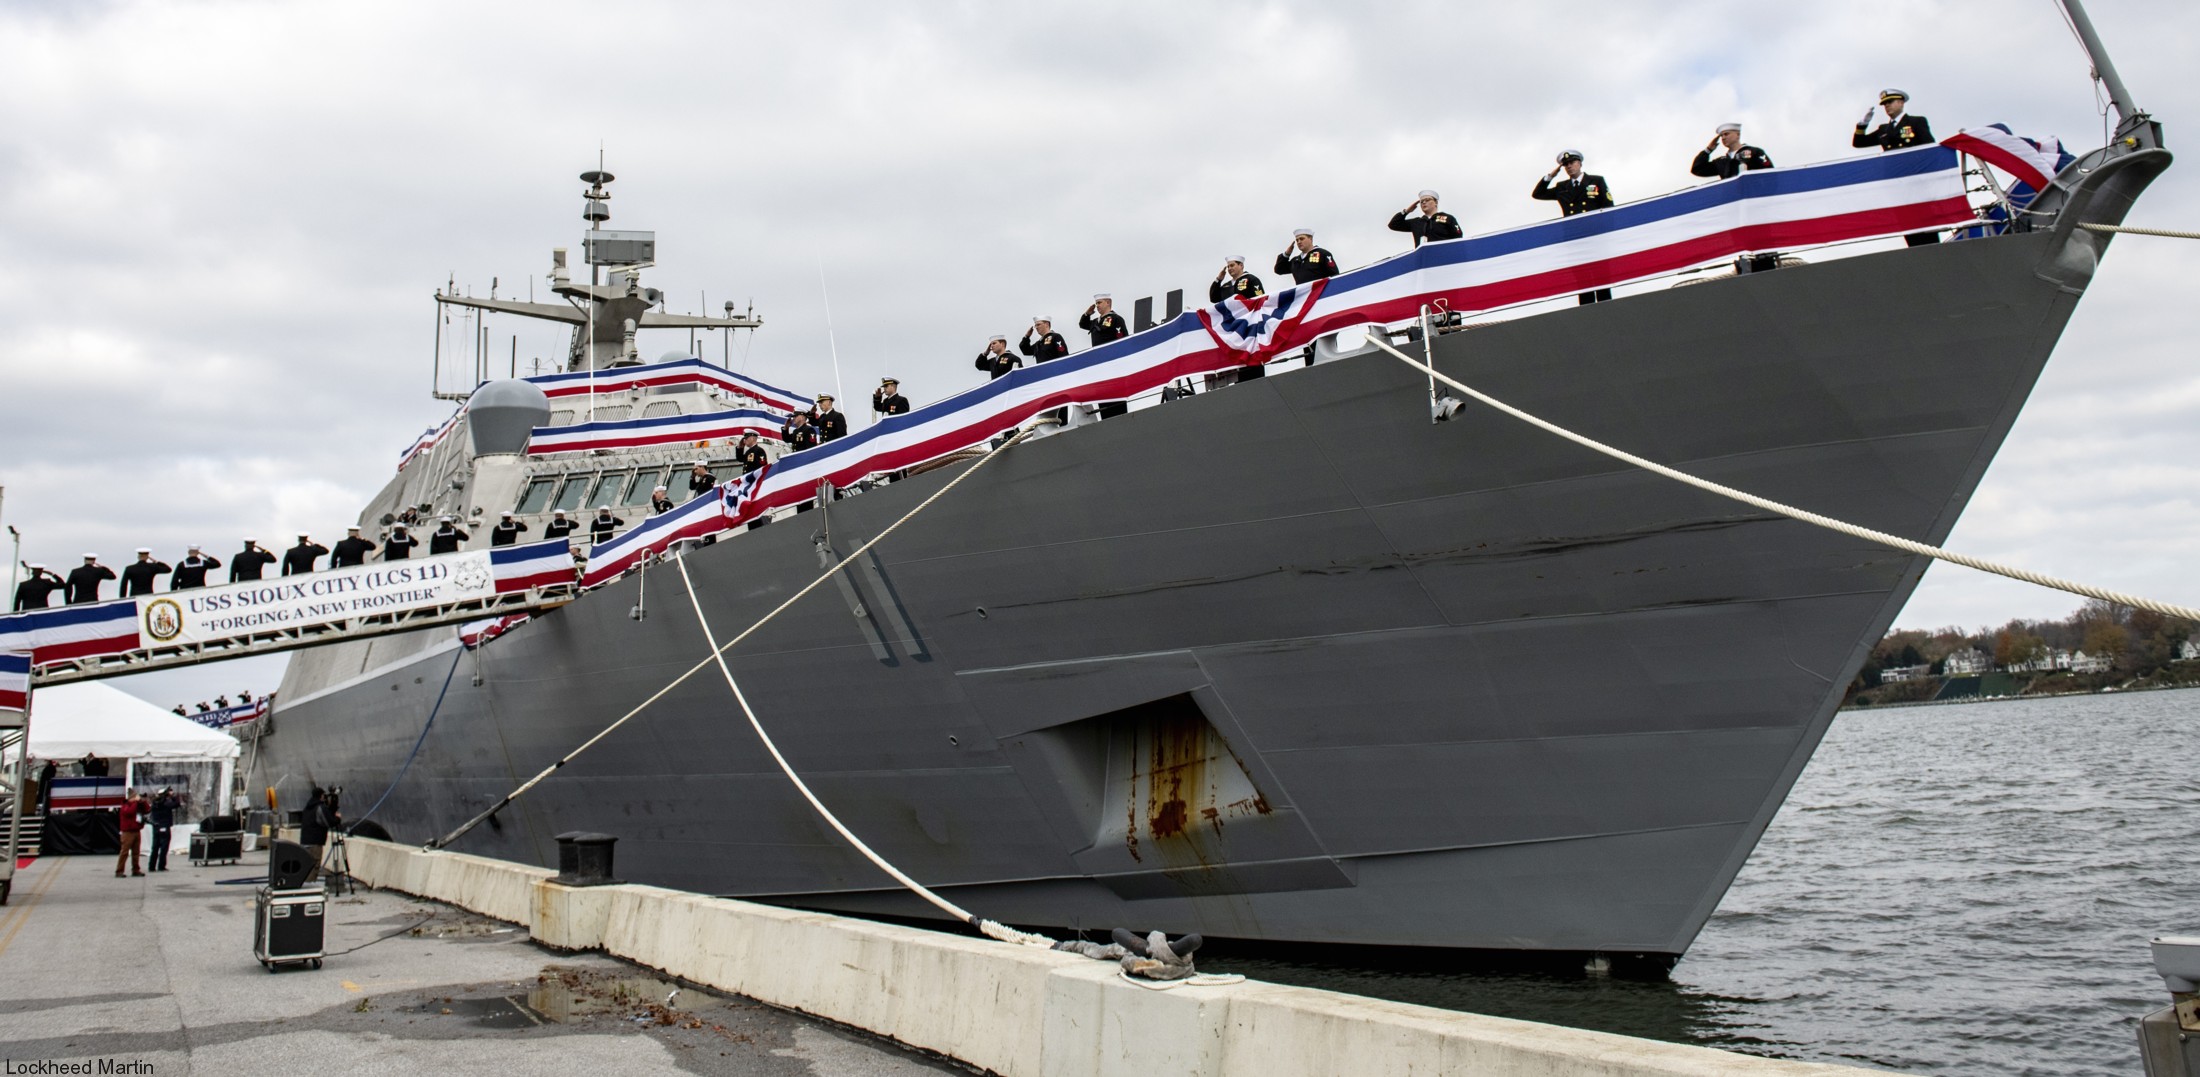 lcs-11 uss sioux city freedom class littoral combat ship us navy 18 commissioning naval academy annapolis maryland